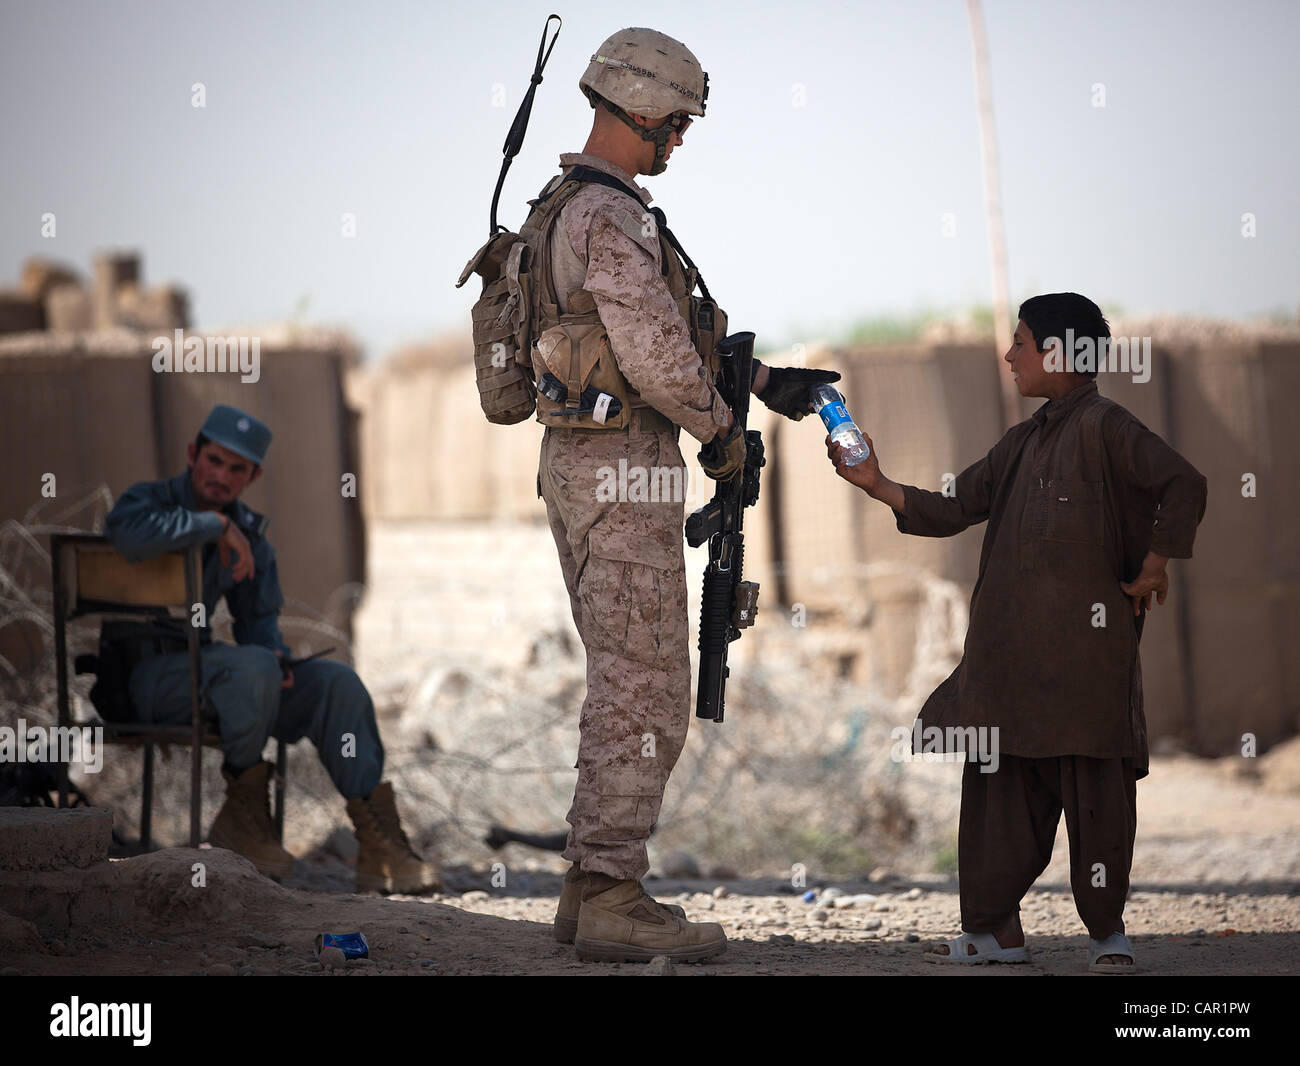 U.S. Marine Cpl. Mark Jensen, a team leader with 4th Platoon, Kilo Company, 3rd Battalion, 3rd Marine Regiment, and 22-year-old native of Nyssa, Ore., shares a water bottle with an Afghan boy while providing security at a vehicle checkpoint outside the Hazar Joft Bazaar April 10, 2012. Stock Photo